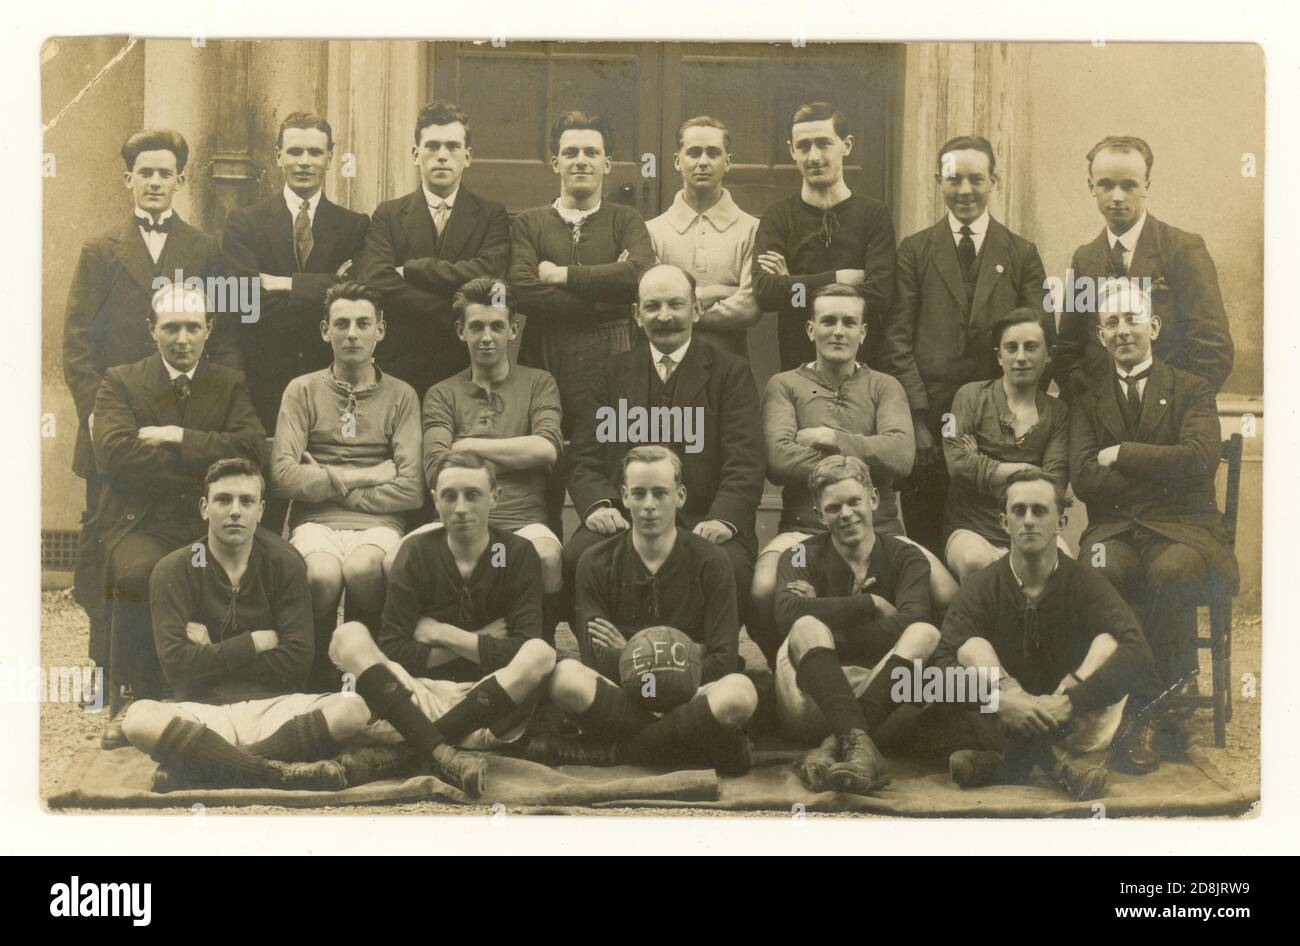 Original antique early 1900's pre WW1 club photograph postcard of football team - E.F.C. is written on the football, but not known if this Everton Football Club, circa 1912, 1913. unknown location, U.K. Stock Photo